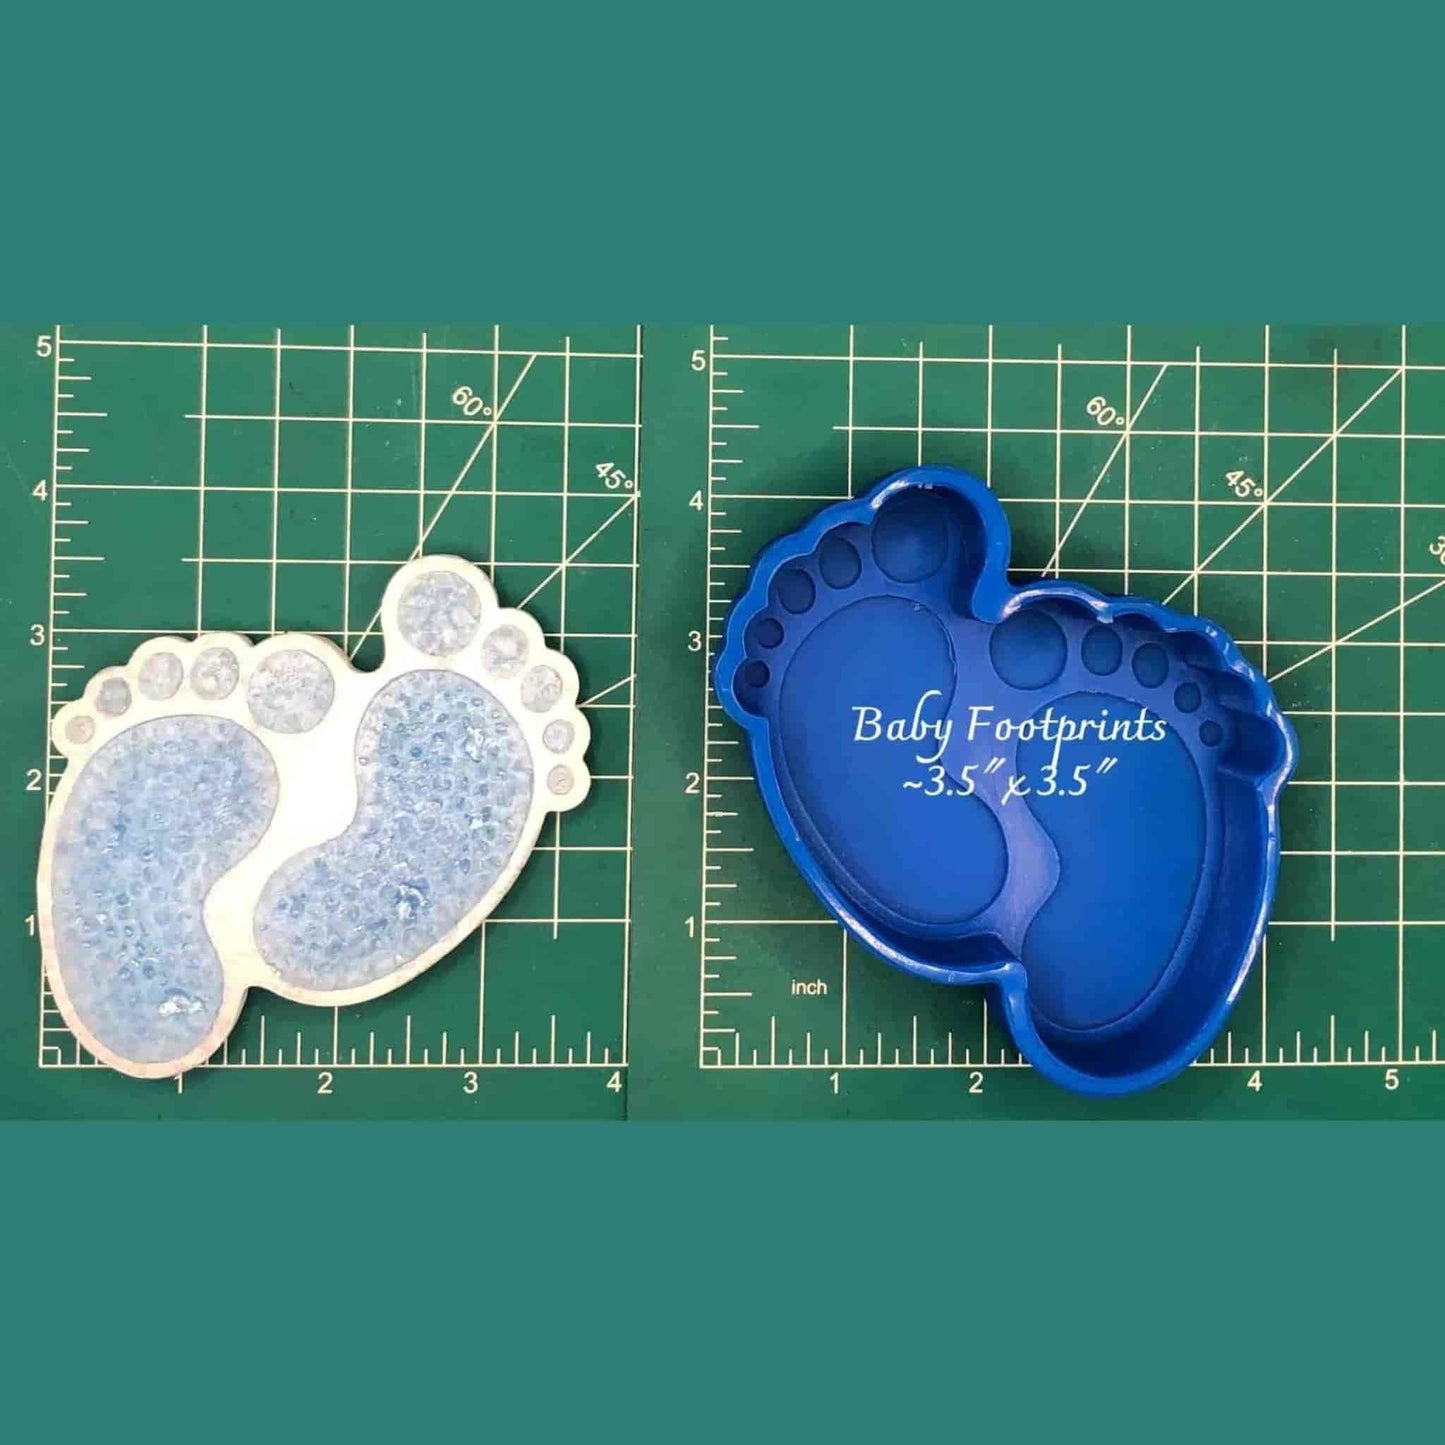 Baby Footprints - Silicone Freshie Mold - Silicone Mold